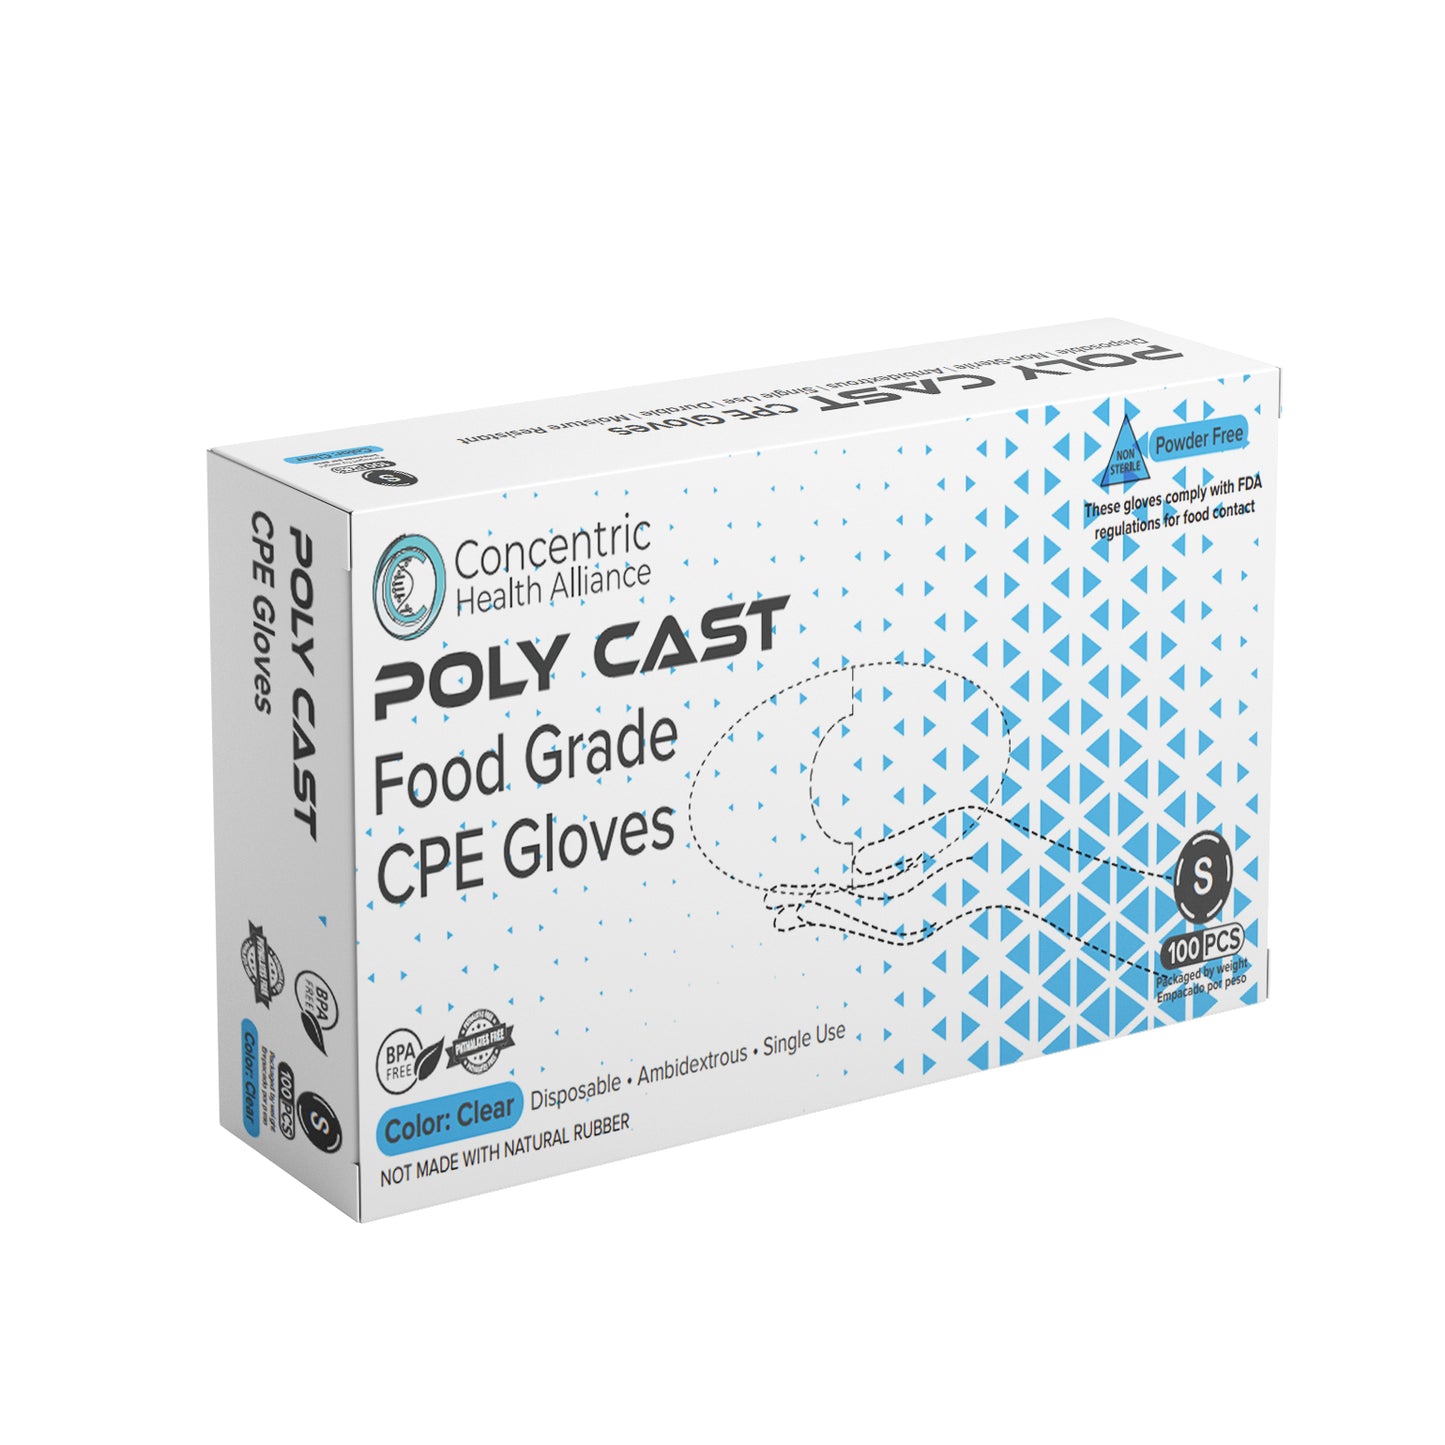 CHA Poly Cast Food Grade CPE Gloves